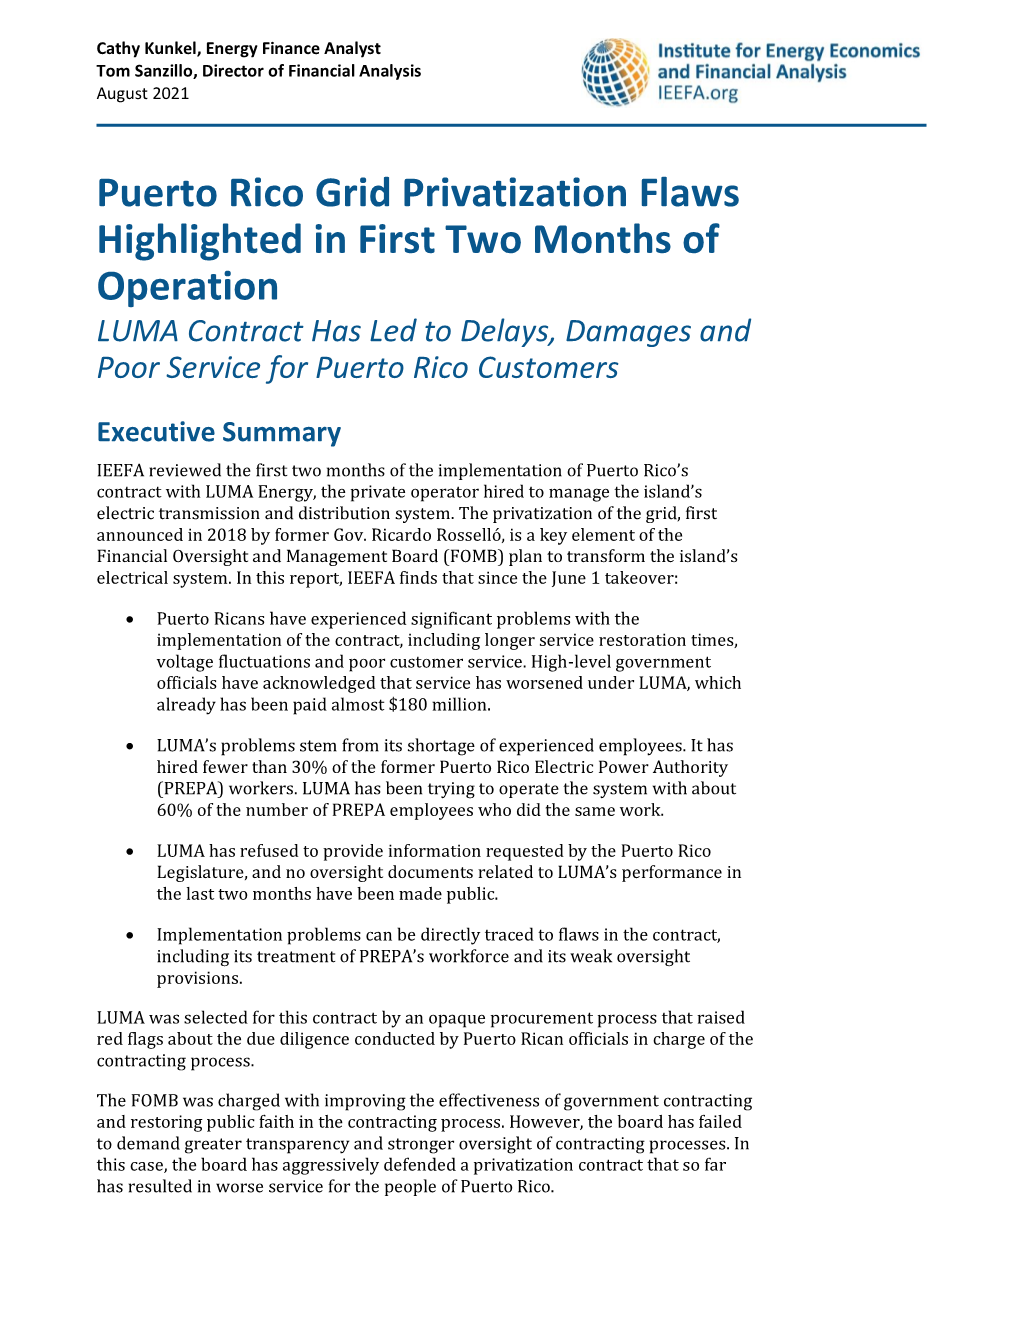 Puerto Rico Grid Privatization Flaws Highlighted in First Two Months of Operation LUMA Contract Has Led to Delays, Damages and Poor Service for Puerto Rico Customers